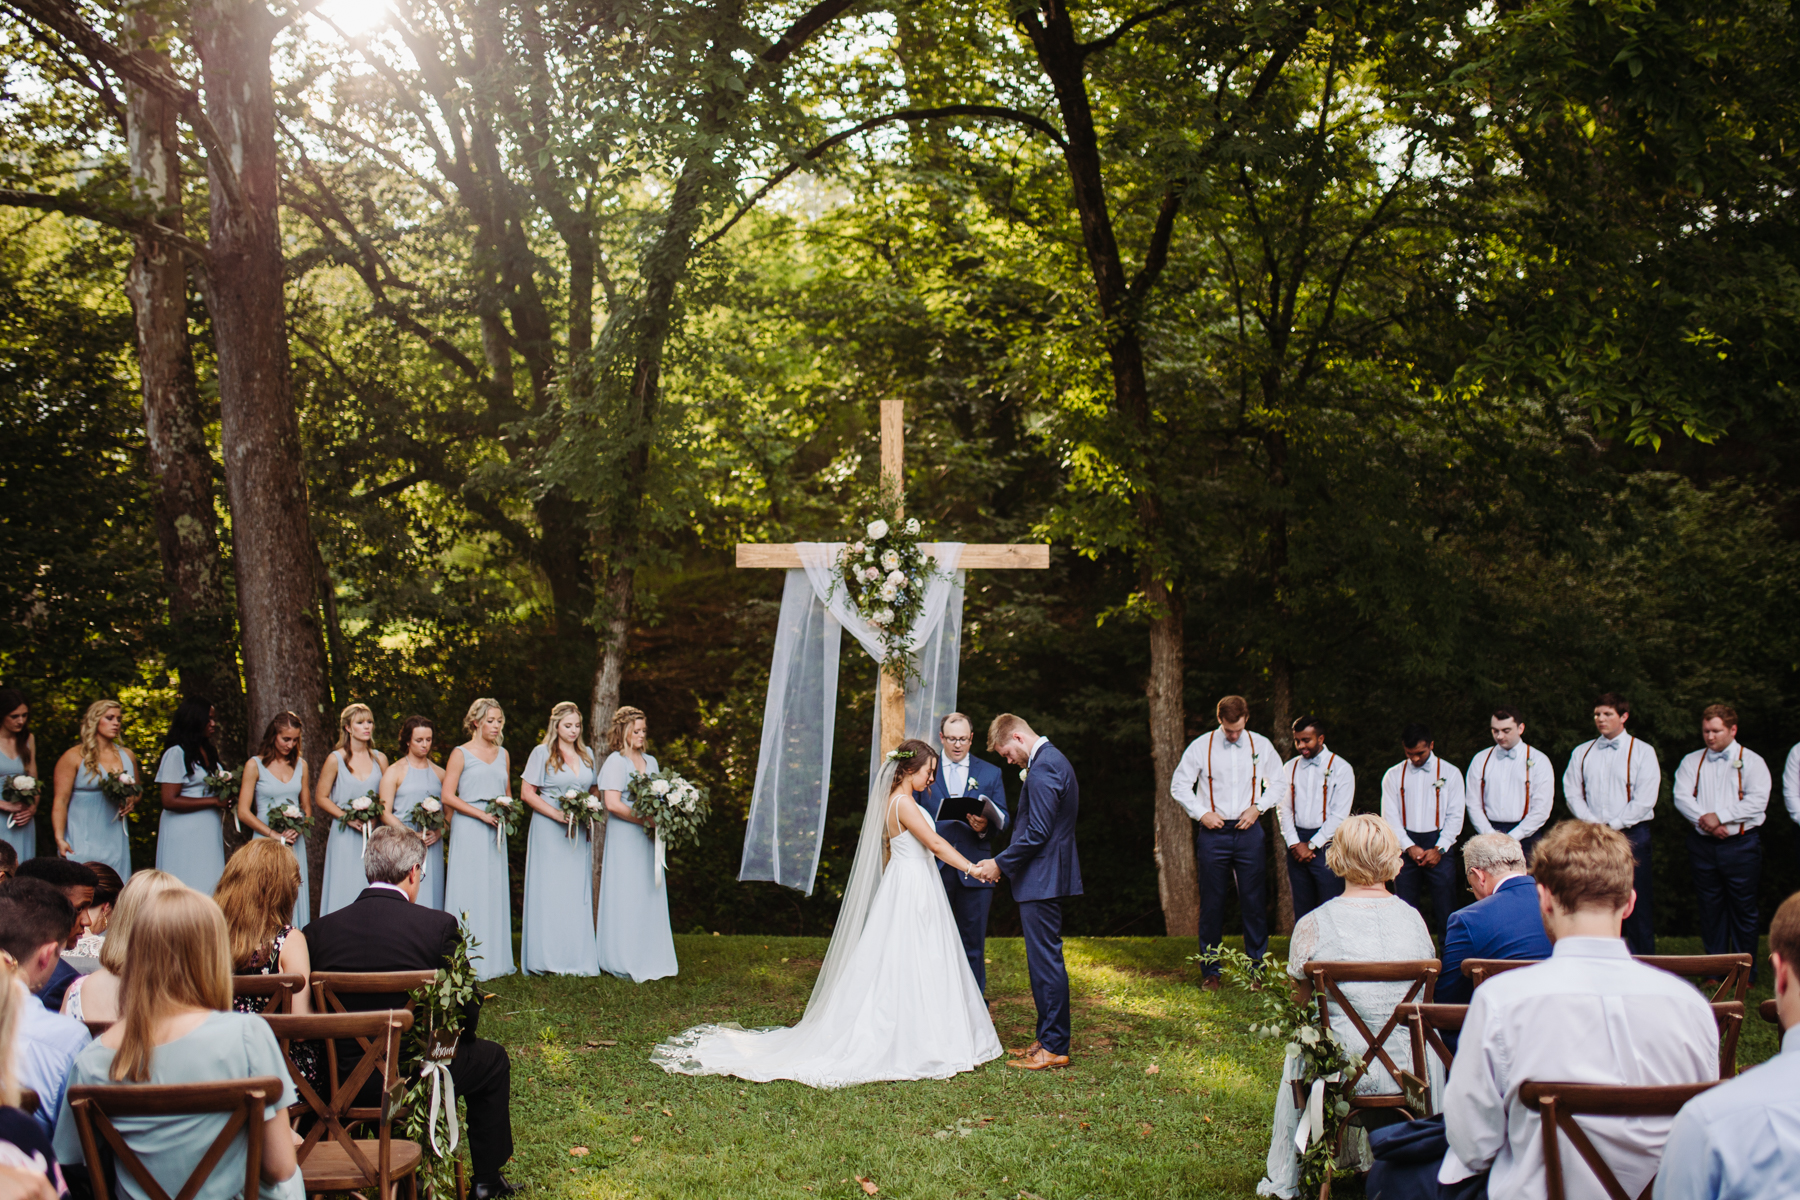 Evening ceremony of a Sunny summer wedding at Dara's Garden in Knoxville, Tennessee 